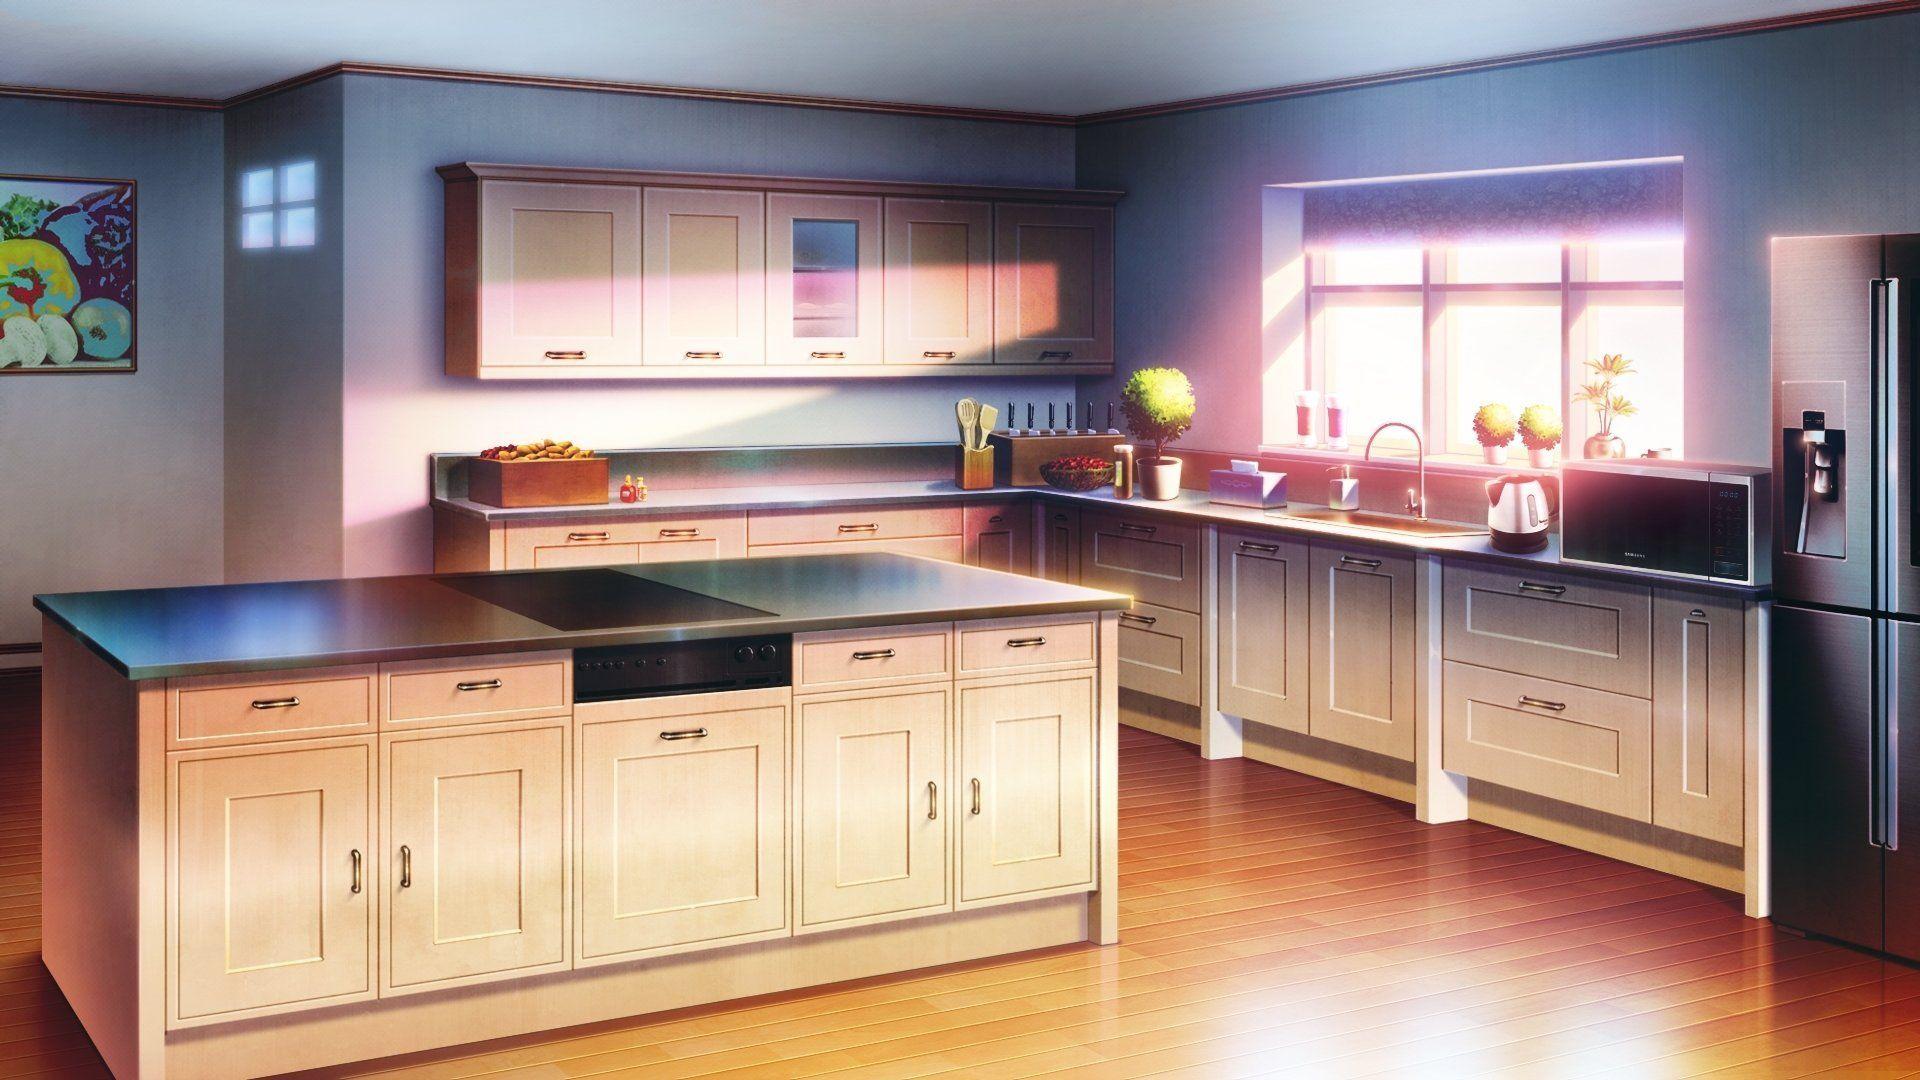 Anime Kitchen Wallpapers Top Free Anime Kitchen Backgrounds Wallpaperaccess